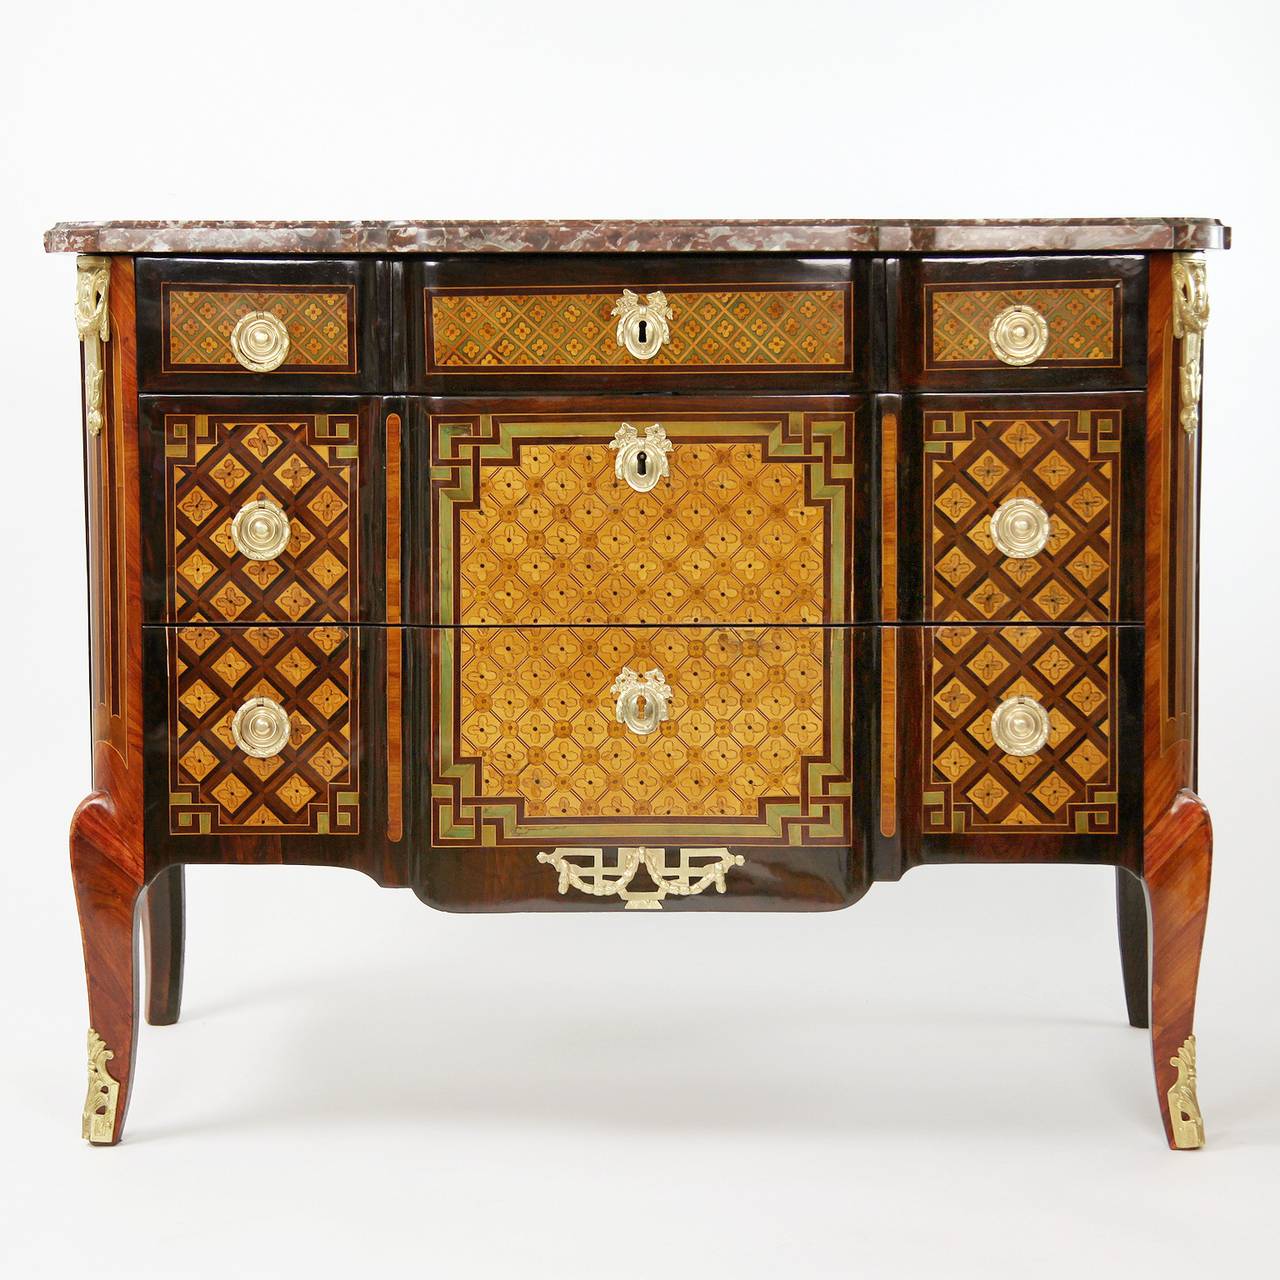 A magnificent gilt bronze mounted kingwood and amaranth parquetry commode with a shaped moulded mottled rouge marble top with rounded corners, above a frieze drawer (devided into three) and two long drawers of break-front form inlaid with trellis